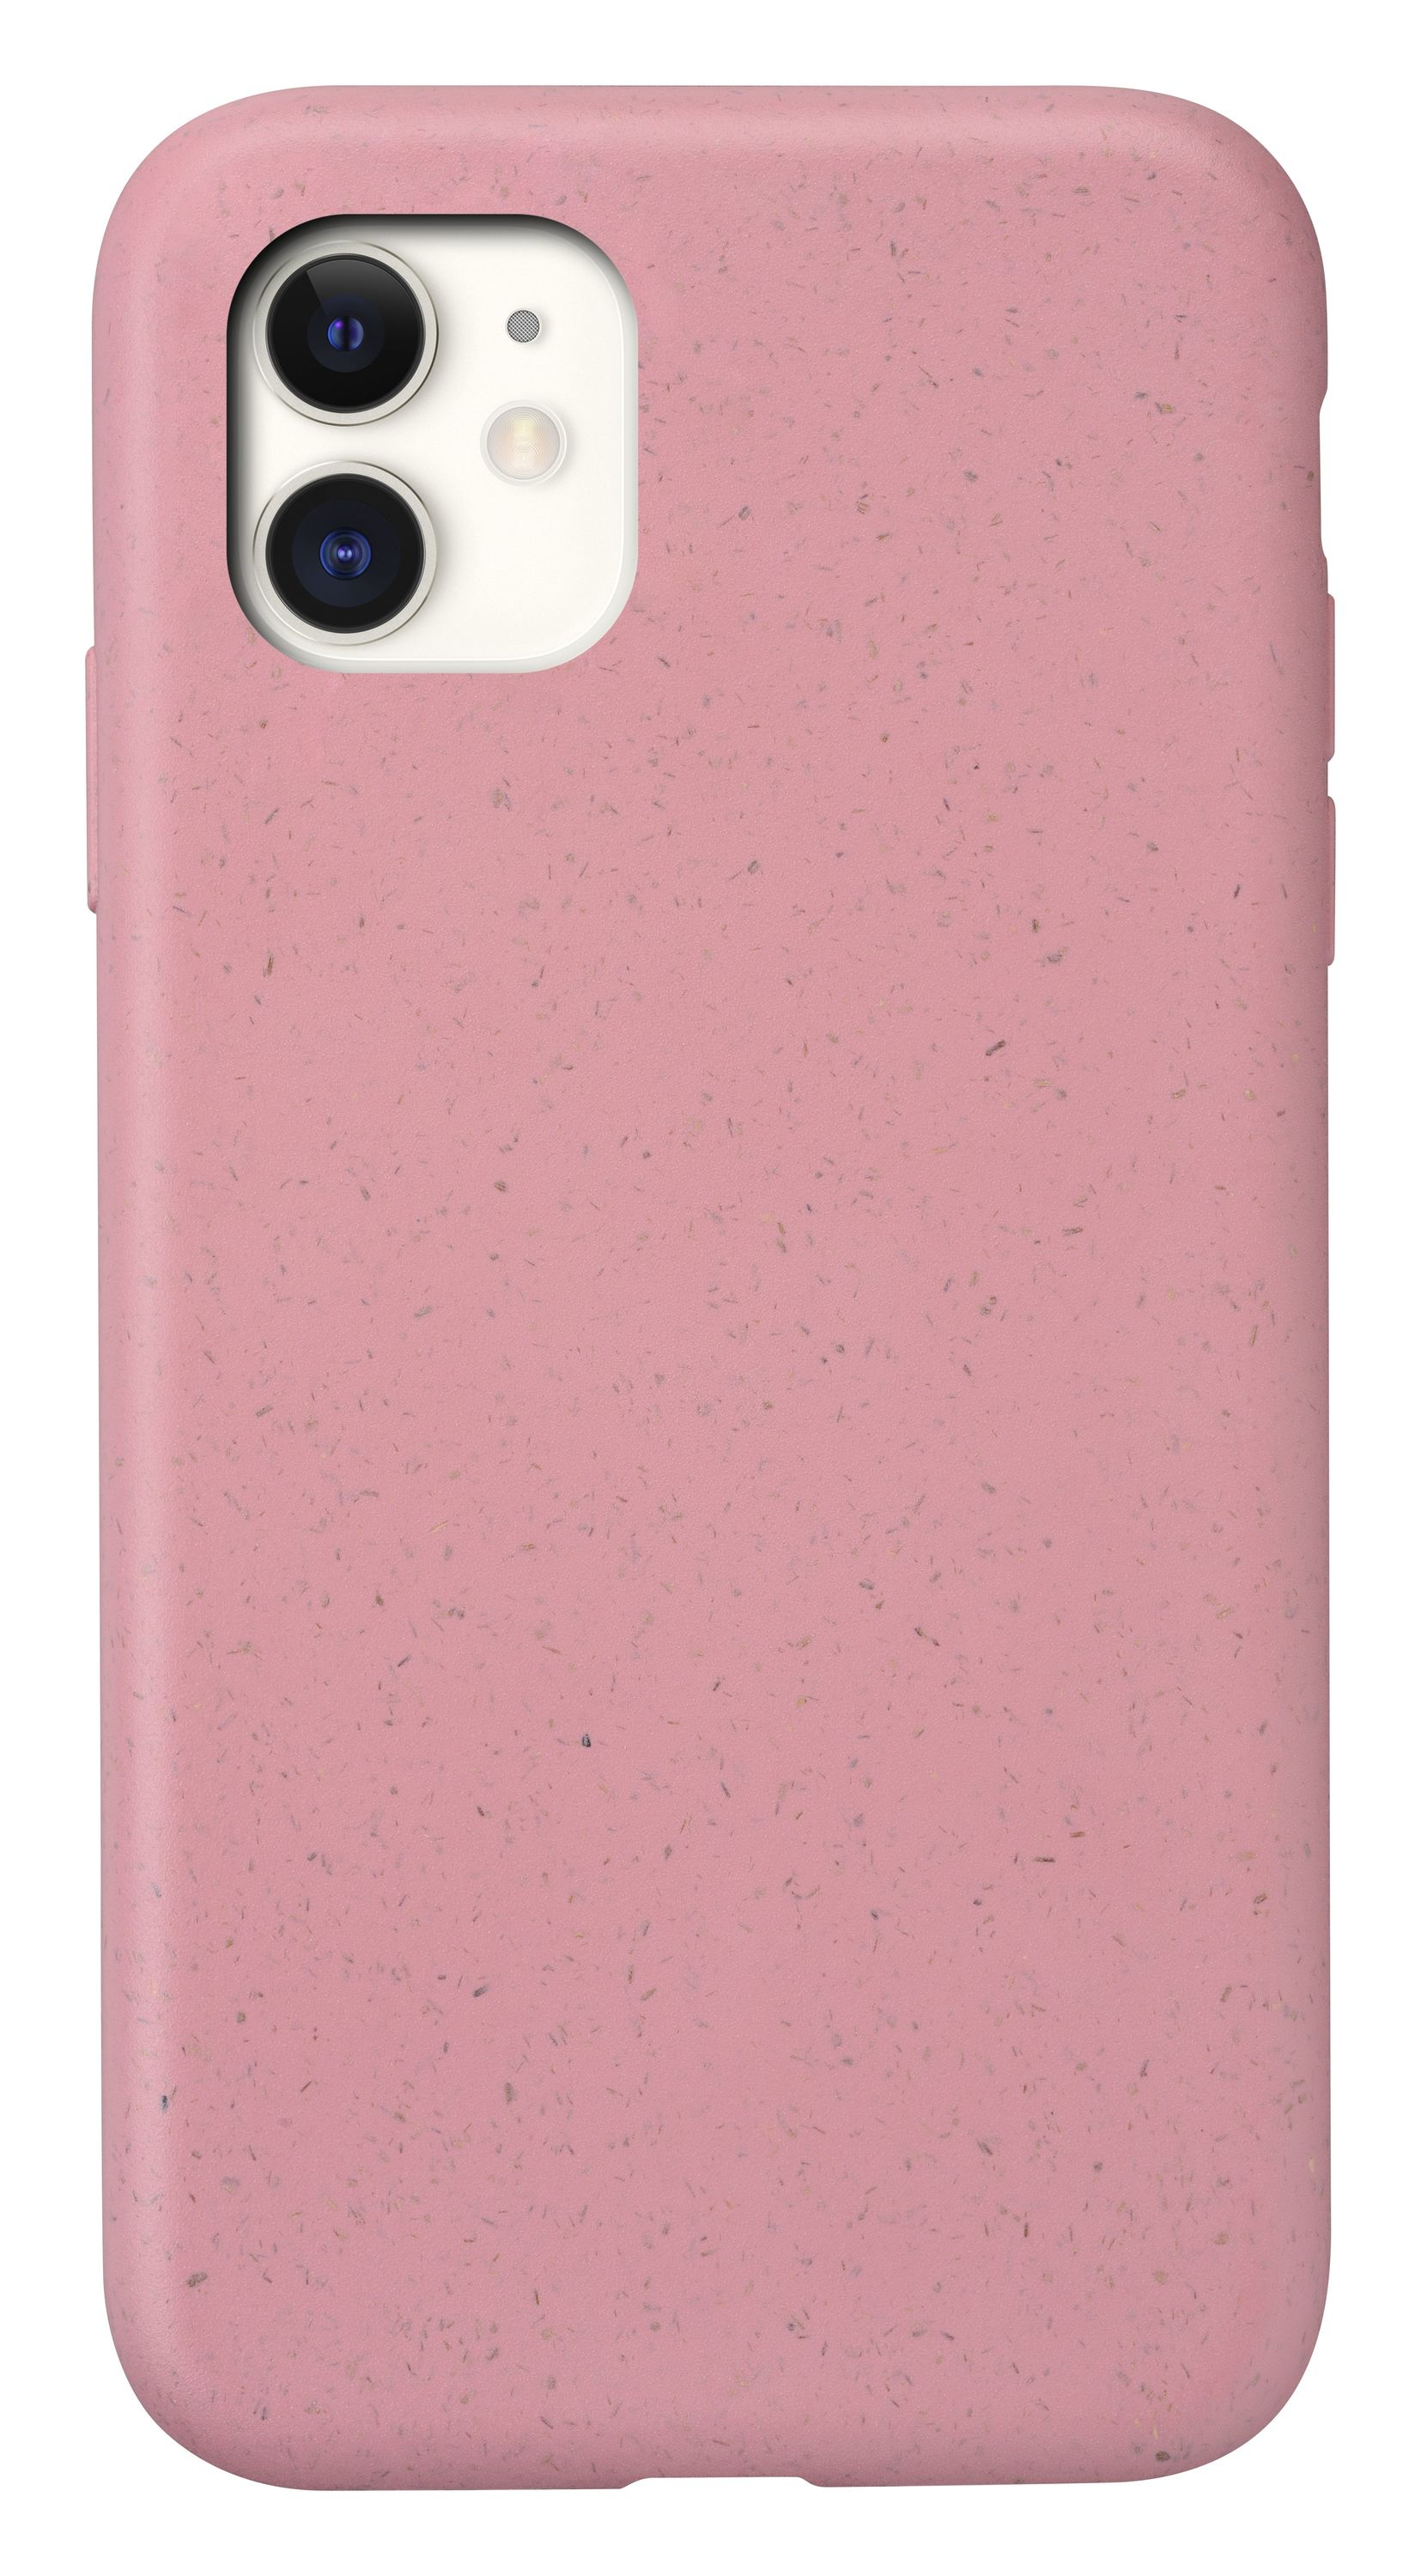 iPhone 11, case become, pink